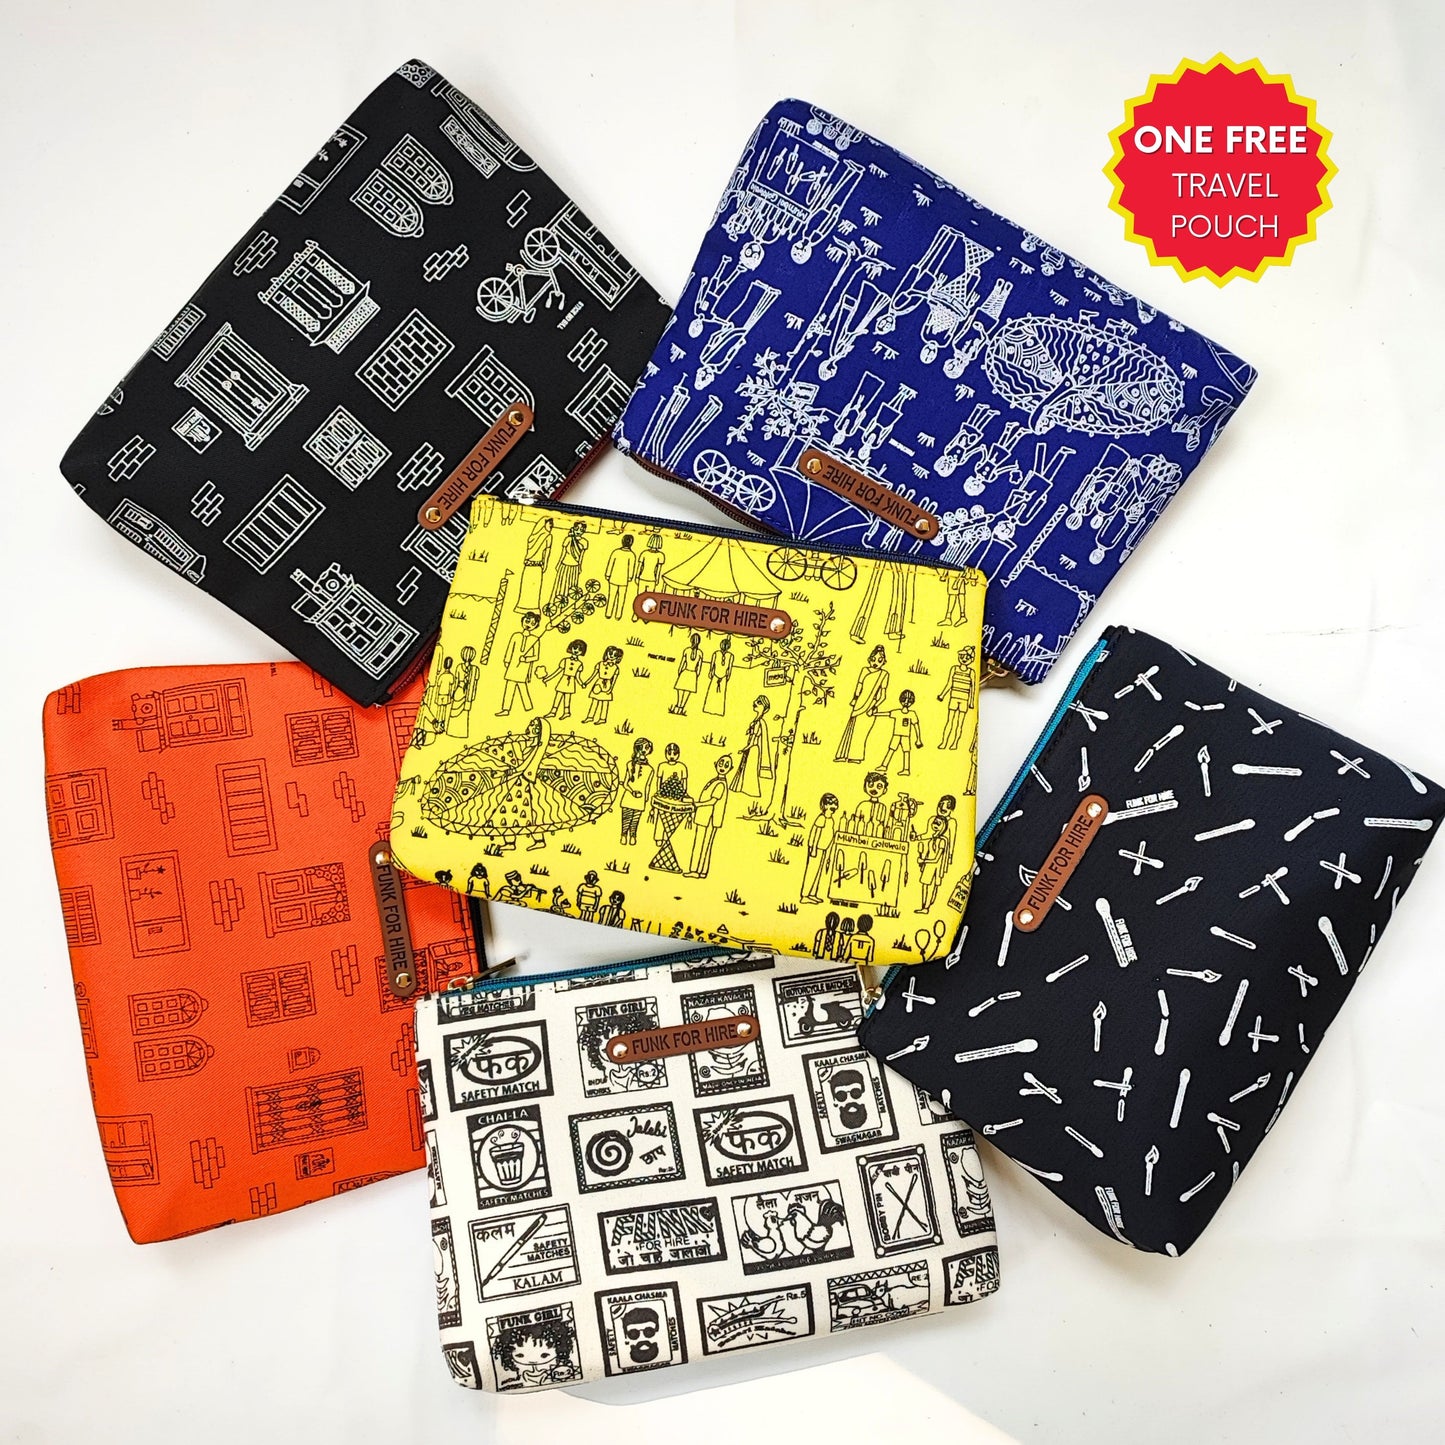 FREE Travel Printed Pouch: * (ONE piece Only)